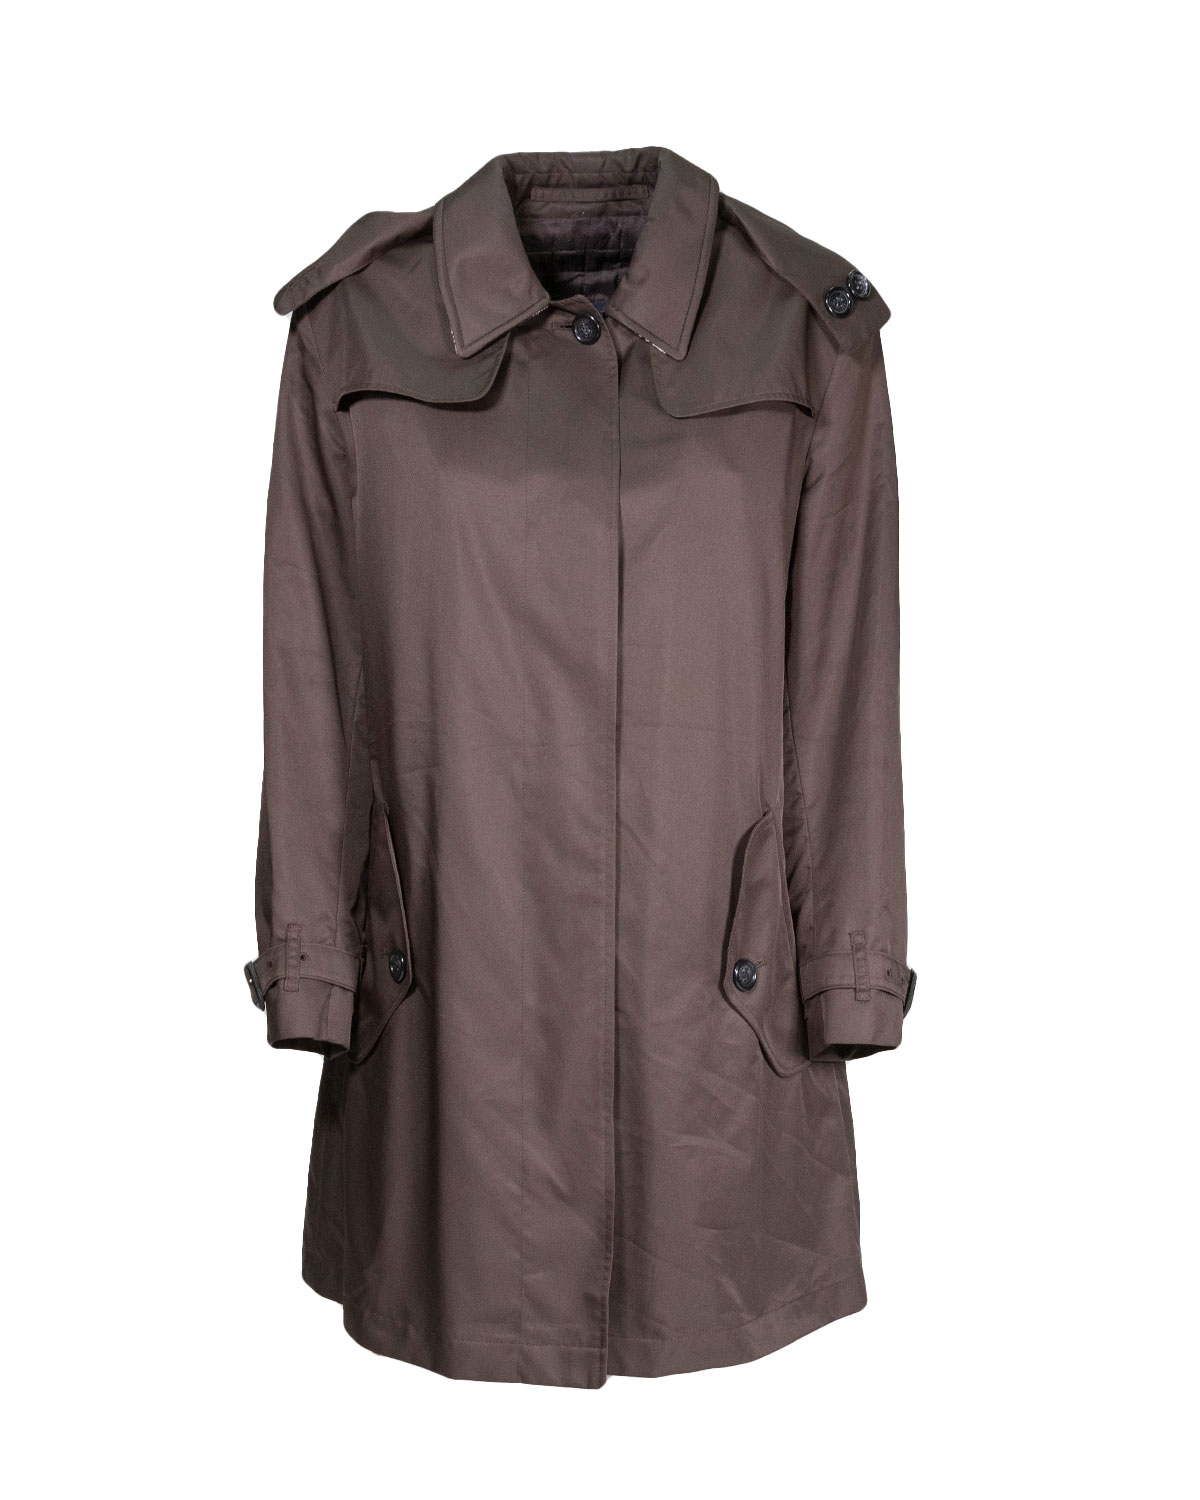 Burberry London - 100% Polyester trench coat